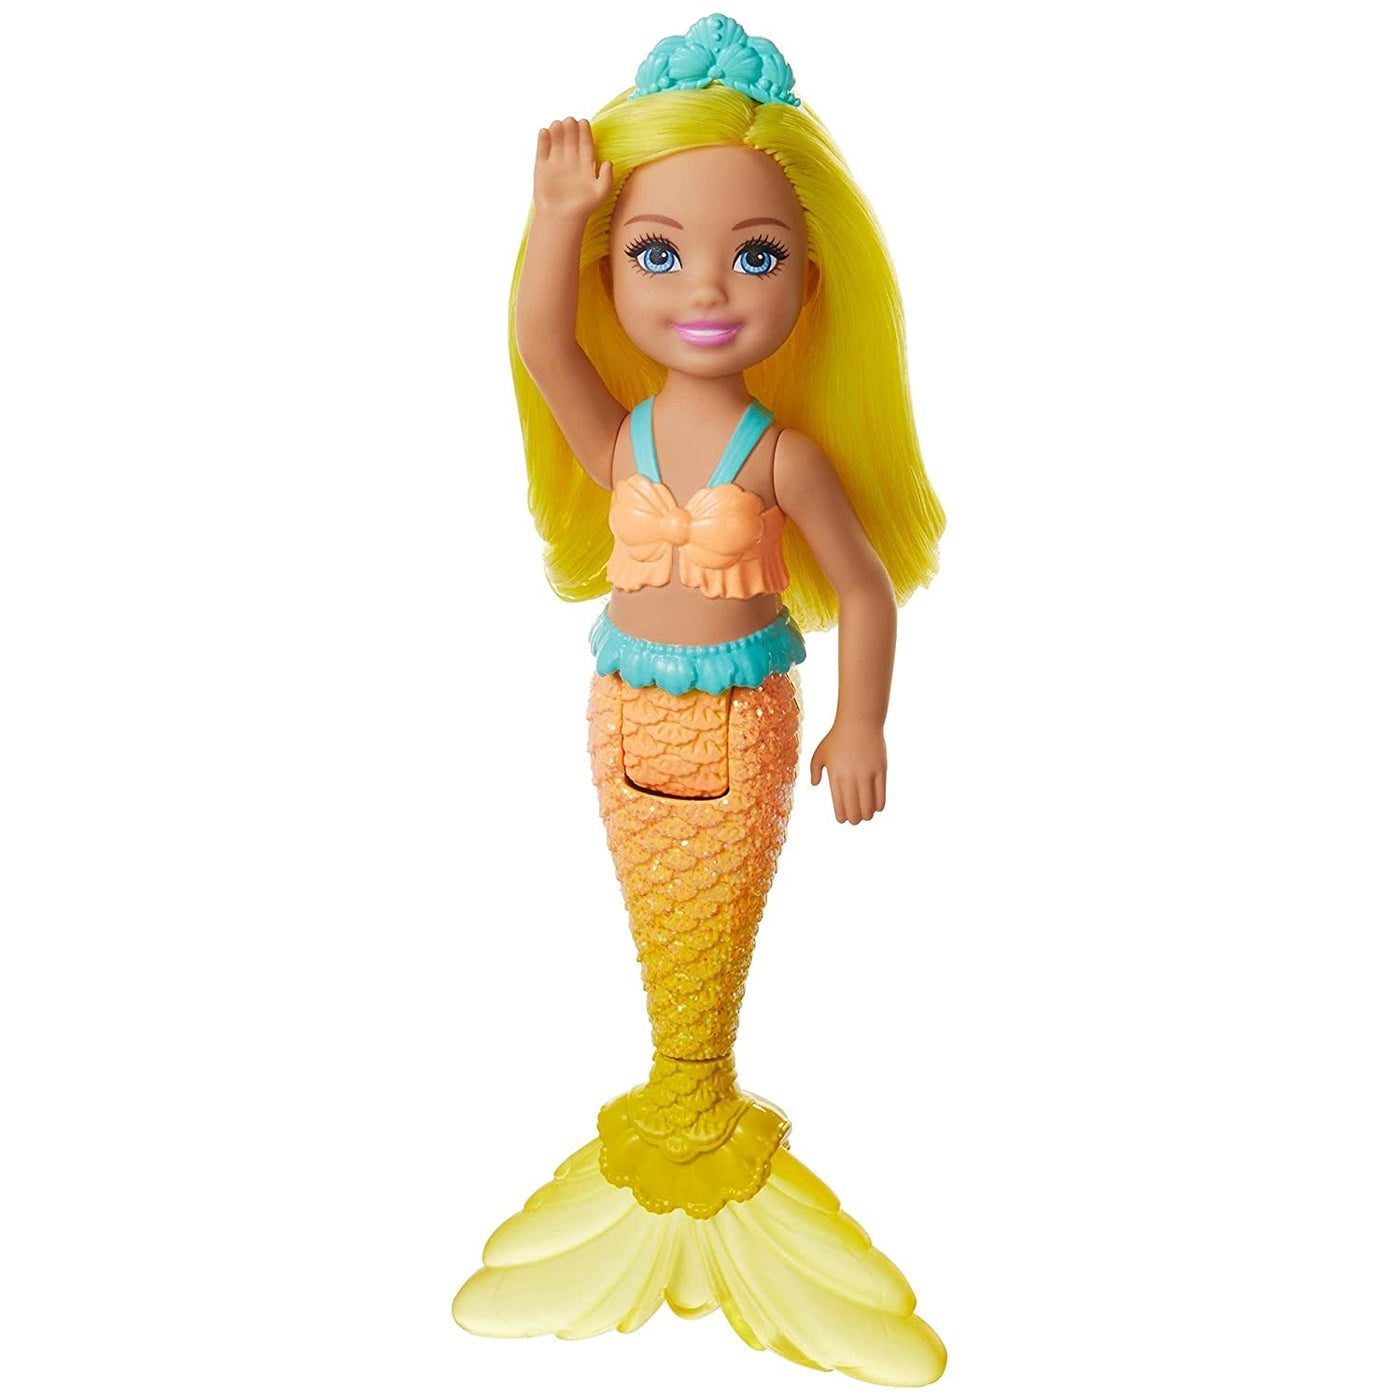 Dreamtopia Chelsea Mermaid Doll: 6.5-Inch - Yellow Hair And Tail | Barbie